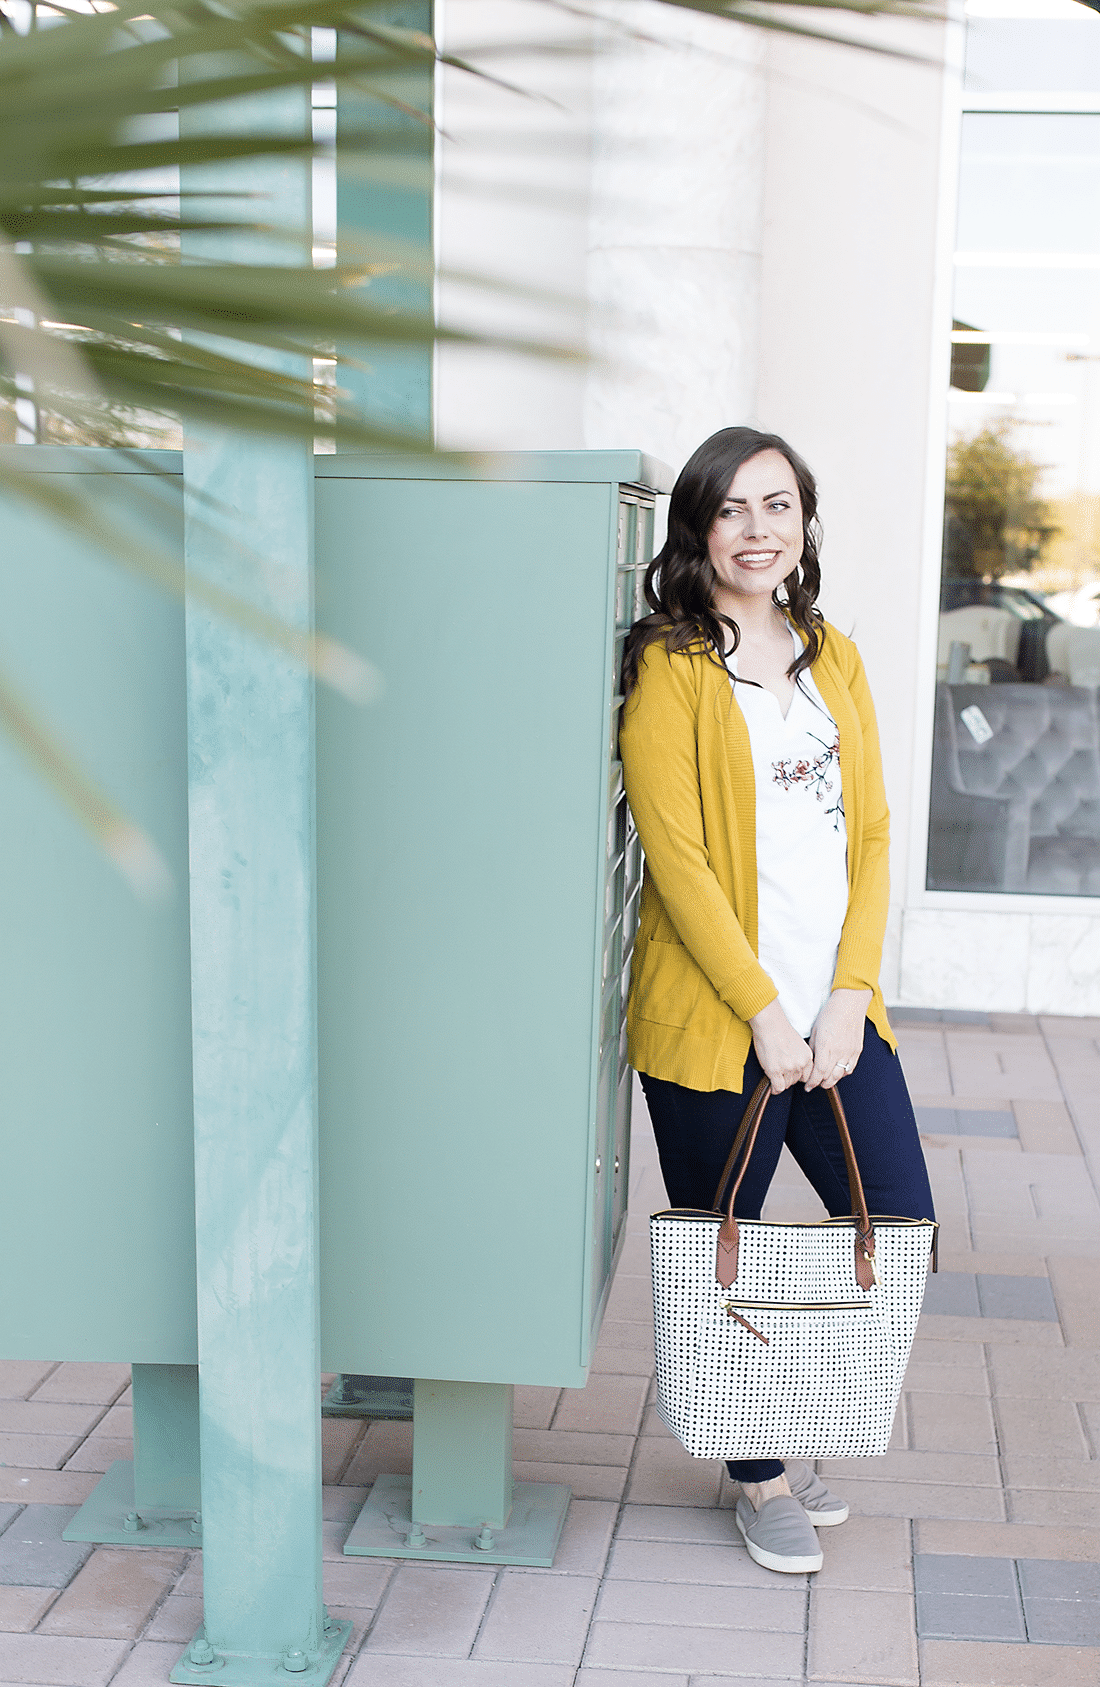 Need help vacation packing for that next romantic getaway or cruise? I'm sharing how Stitch Fix makes vacation packing a cinch!